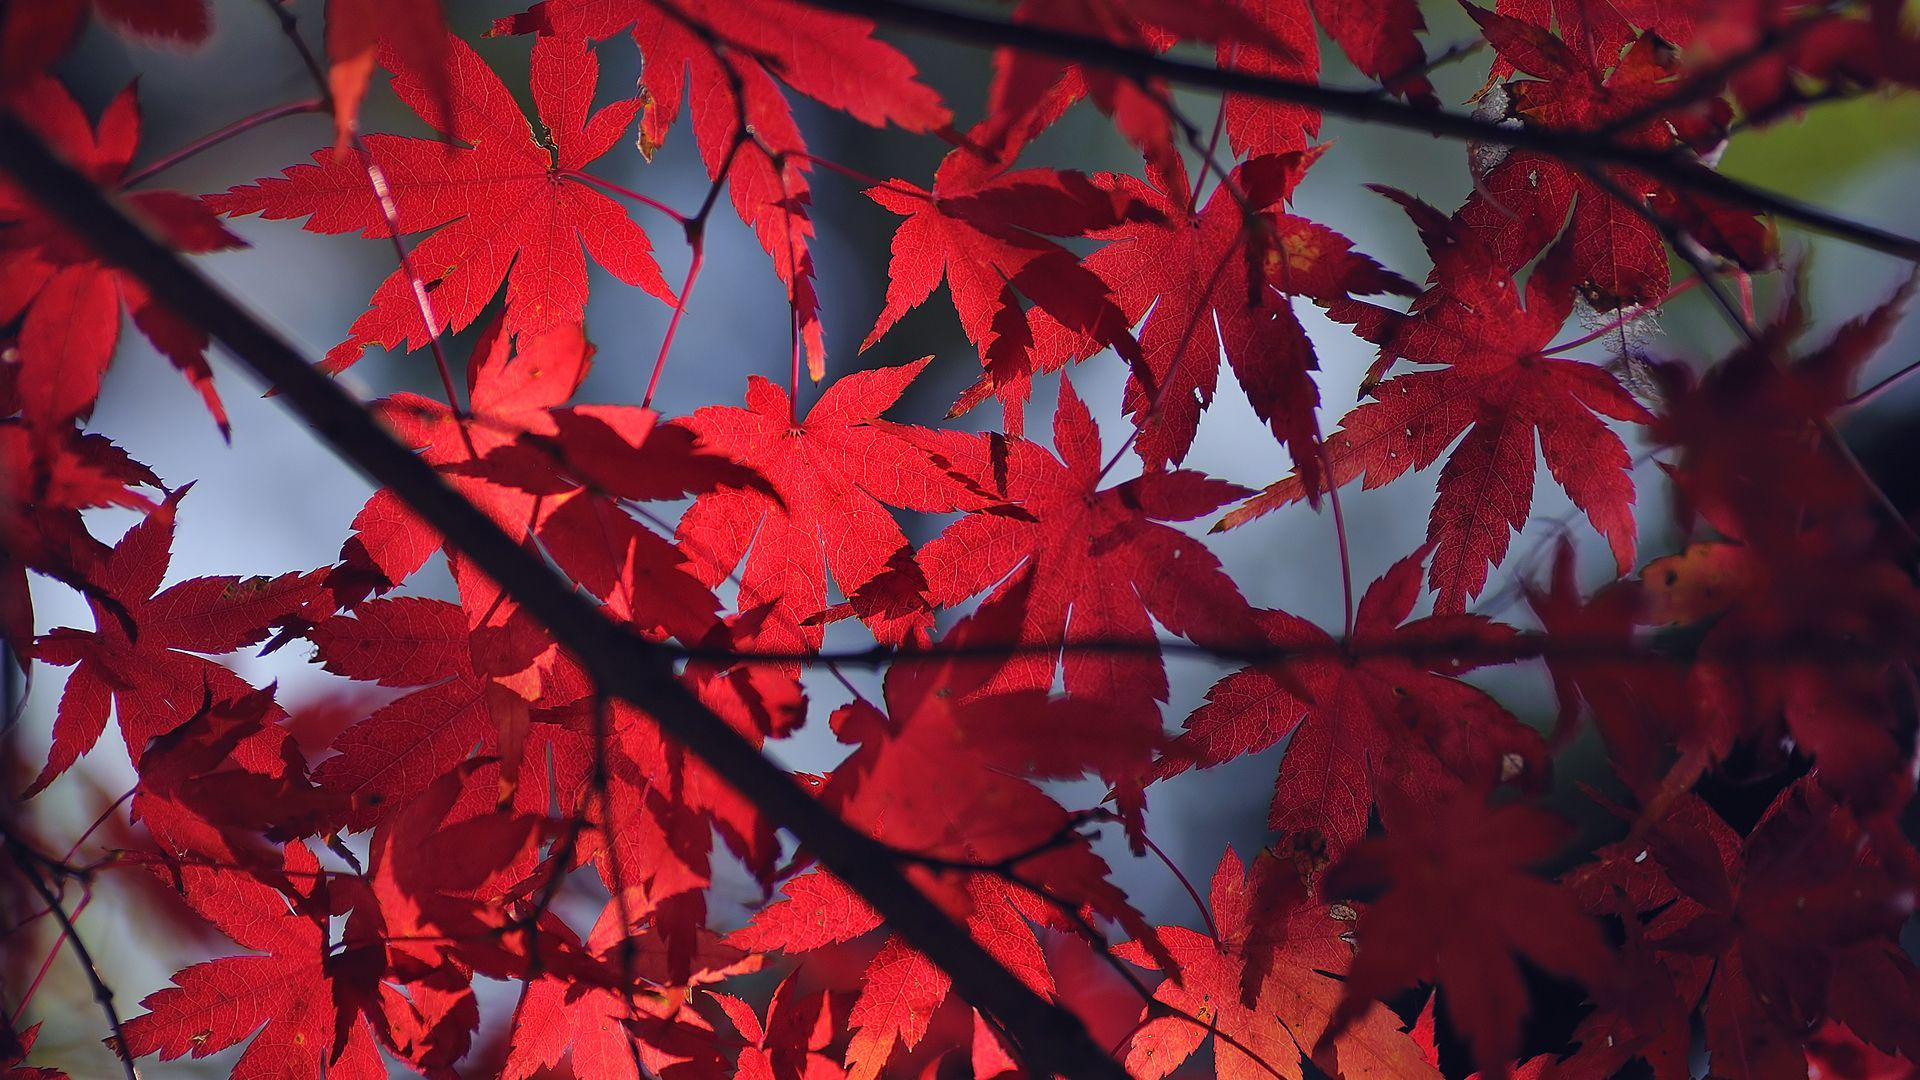 1920x1080 Free download Red leaves Wallpaper HD Background [] for your Desktop, Mobile \u0026 Tablet | Explore 62+ Red Leaves Wallpaper | Green Leaves Wallpaper, Fall Leaves Wallpaper Desktop, Autumn Leaves Wallpaper